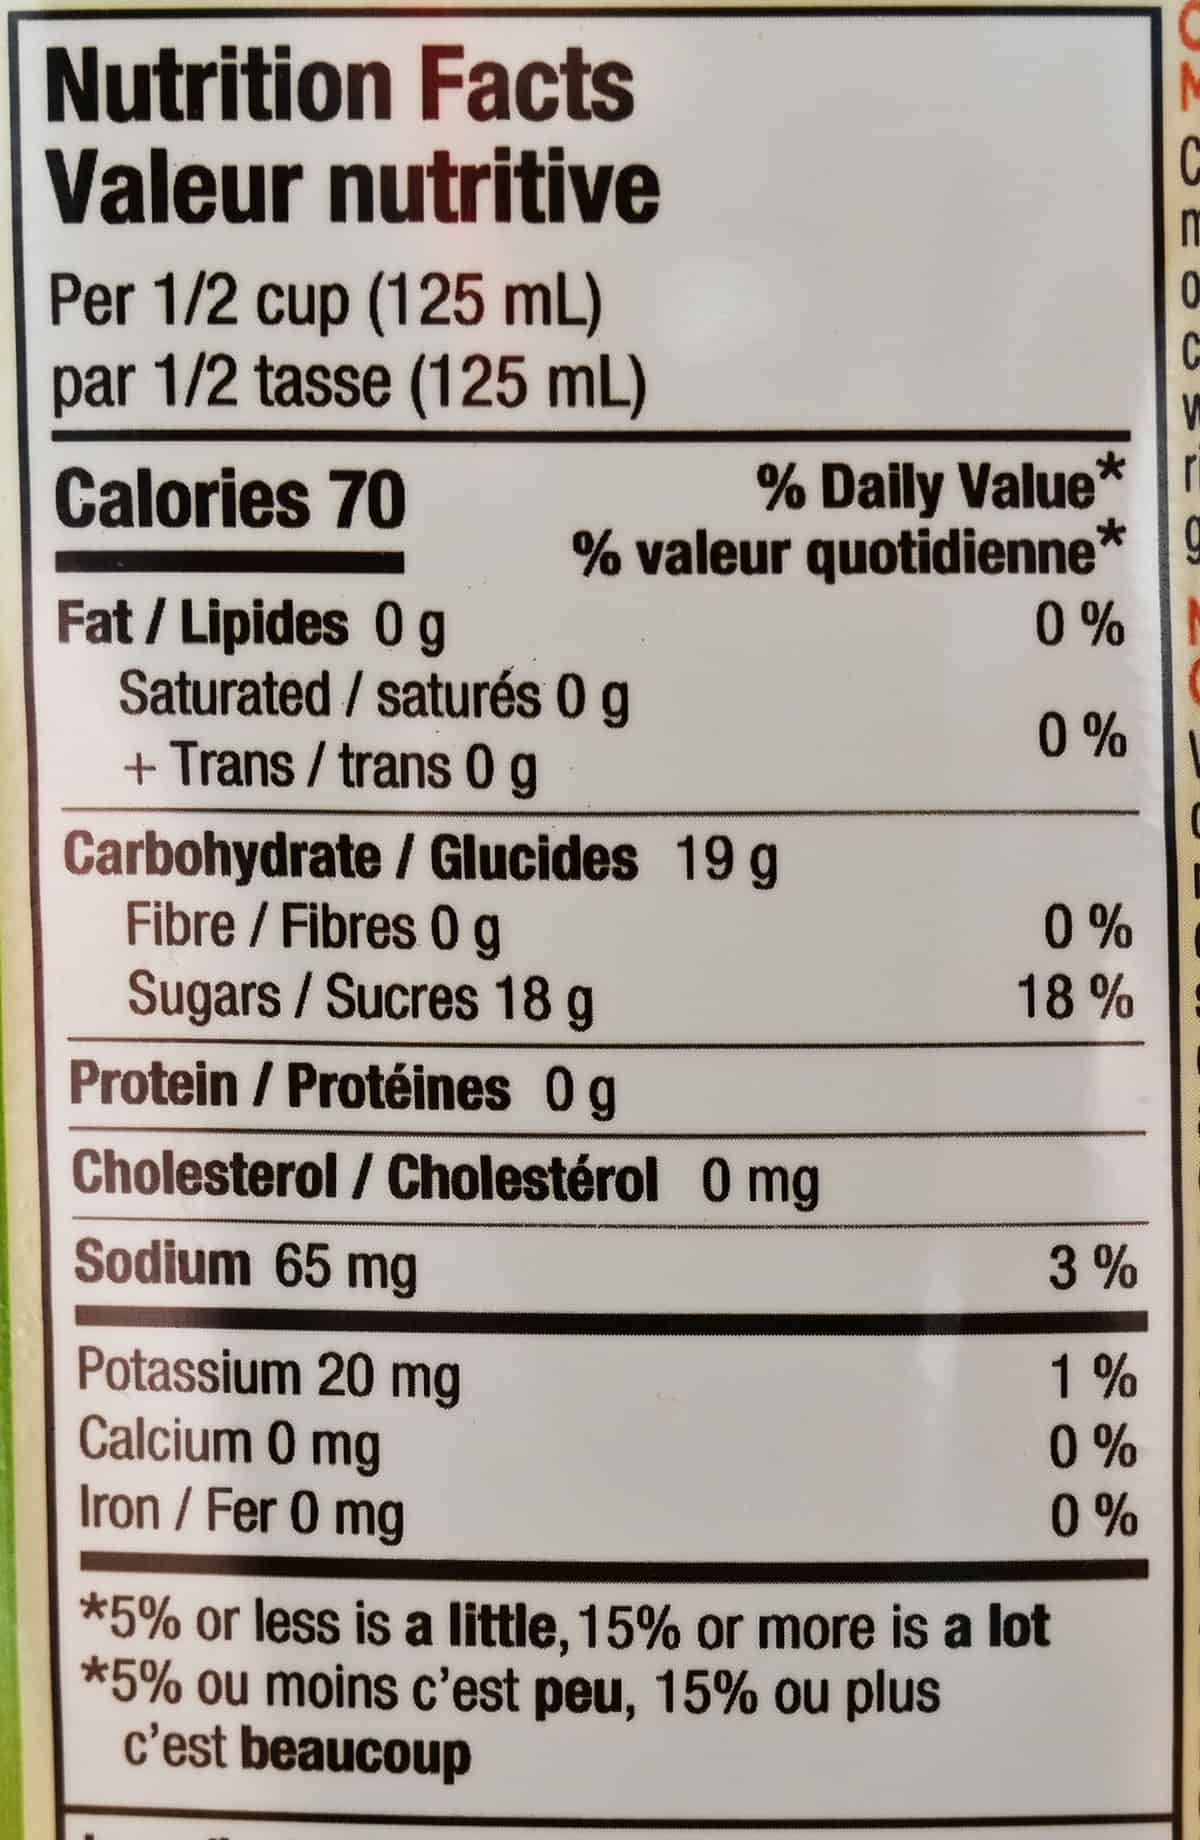 Image of the nutrition facts for the Kirkland Signature Organic Margarita Mix.